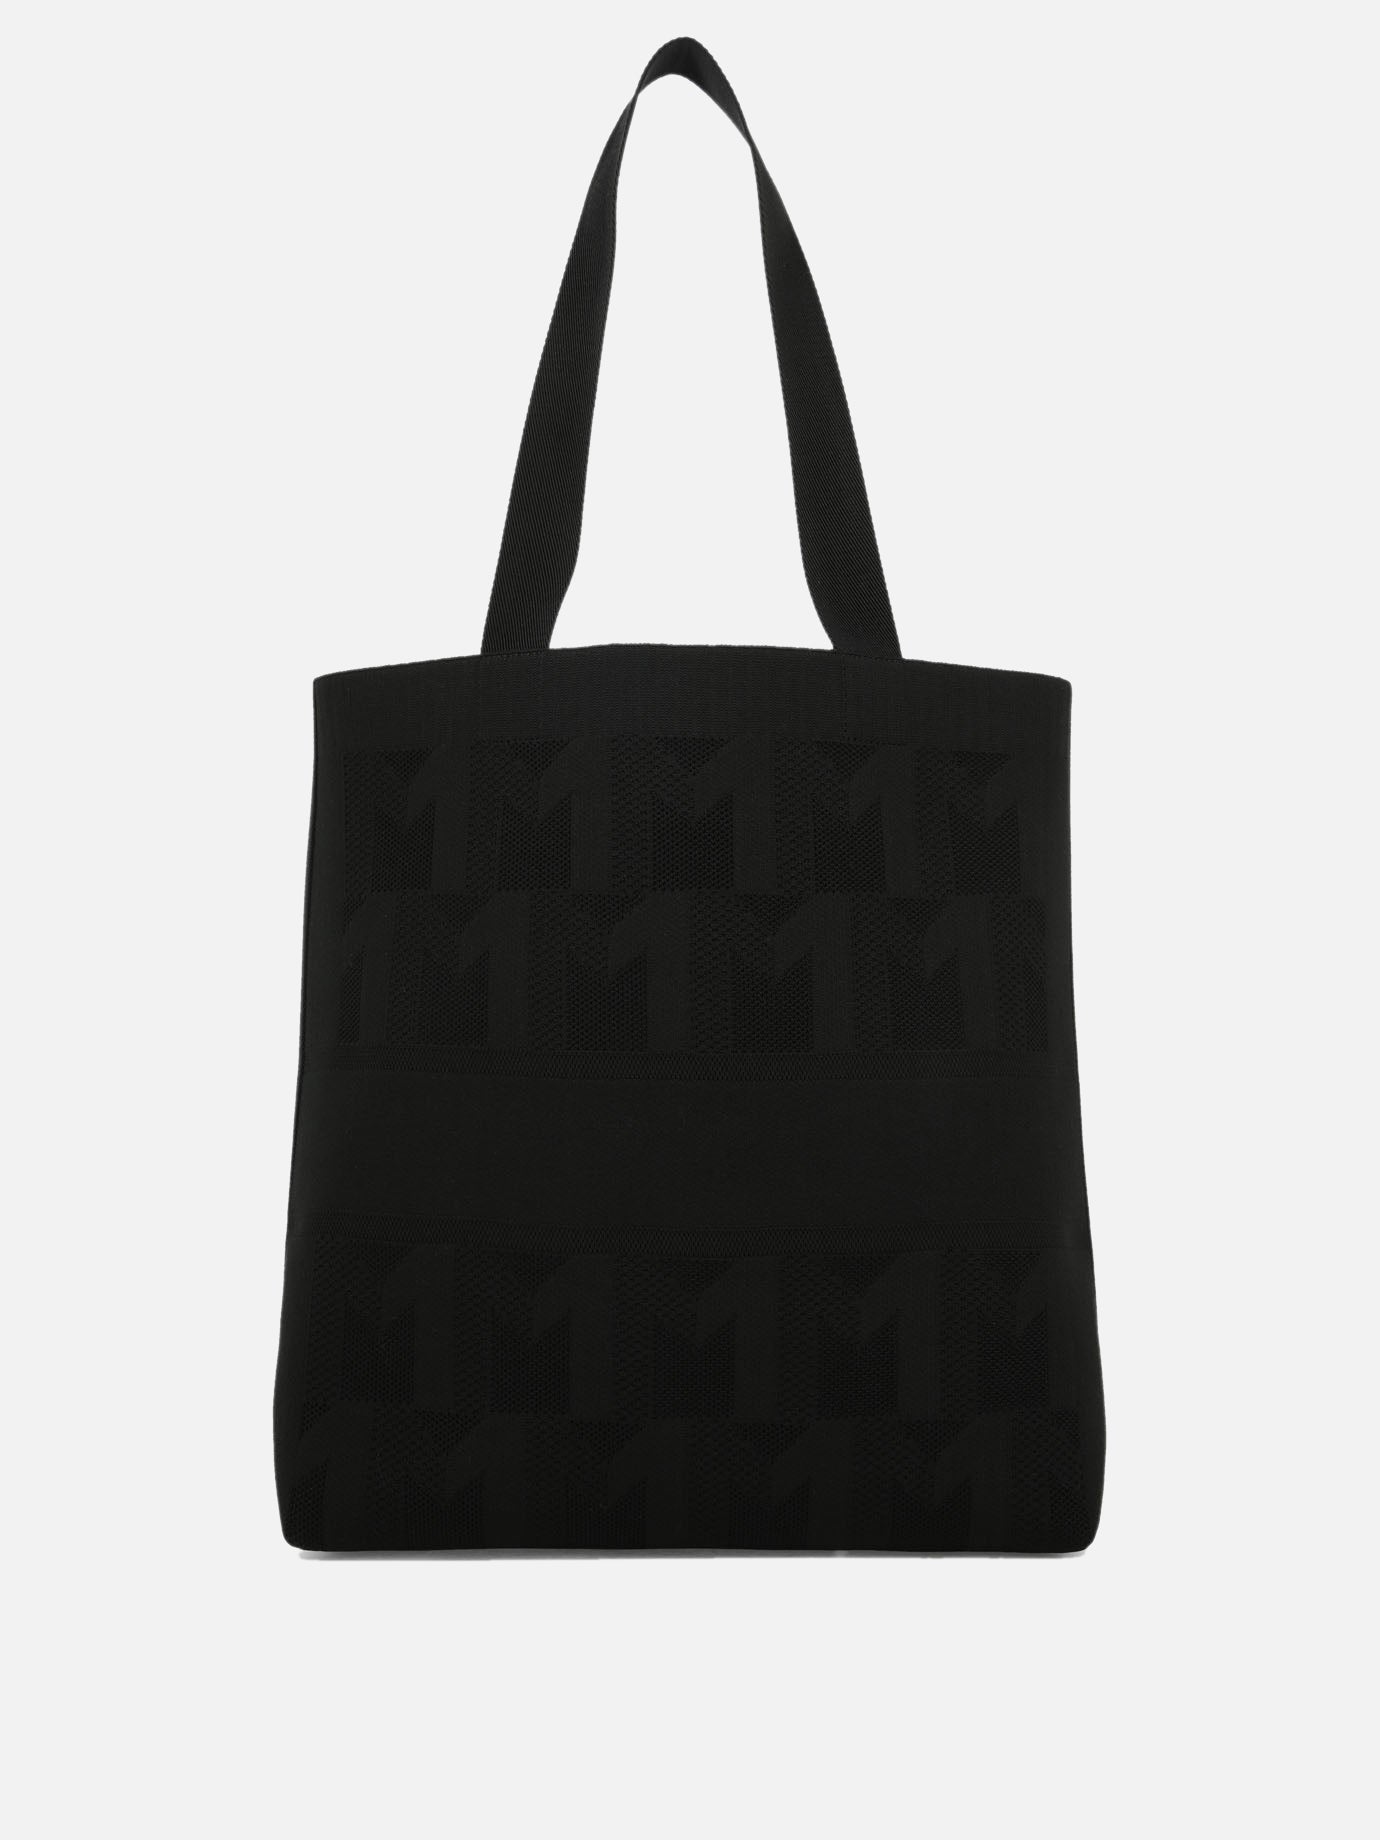 Knit tote